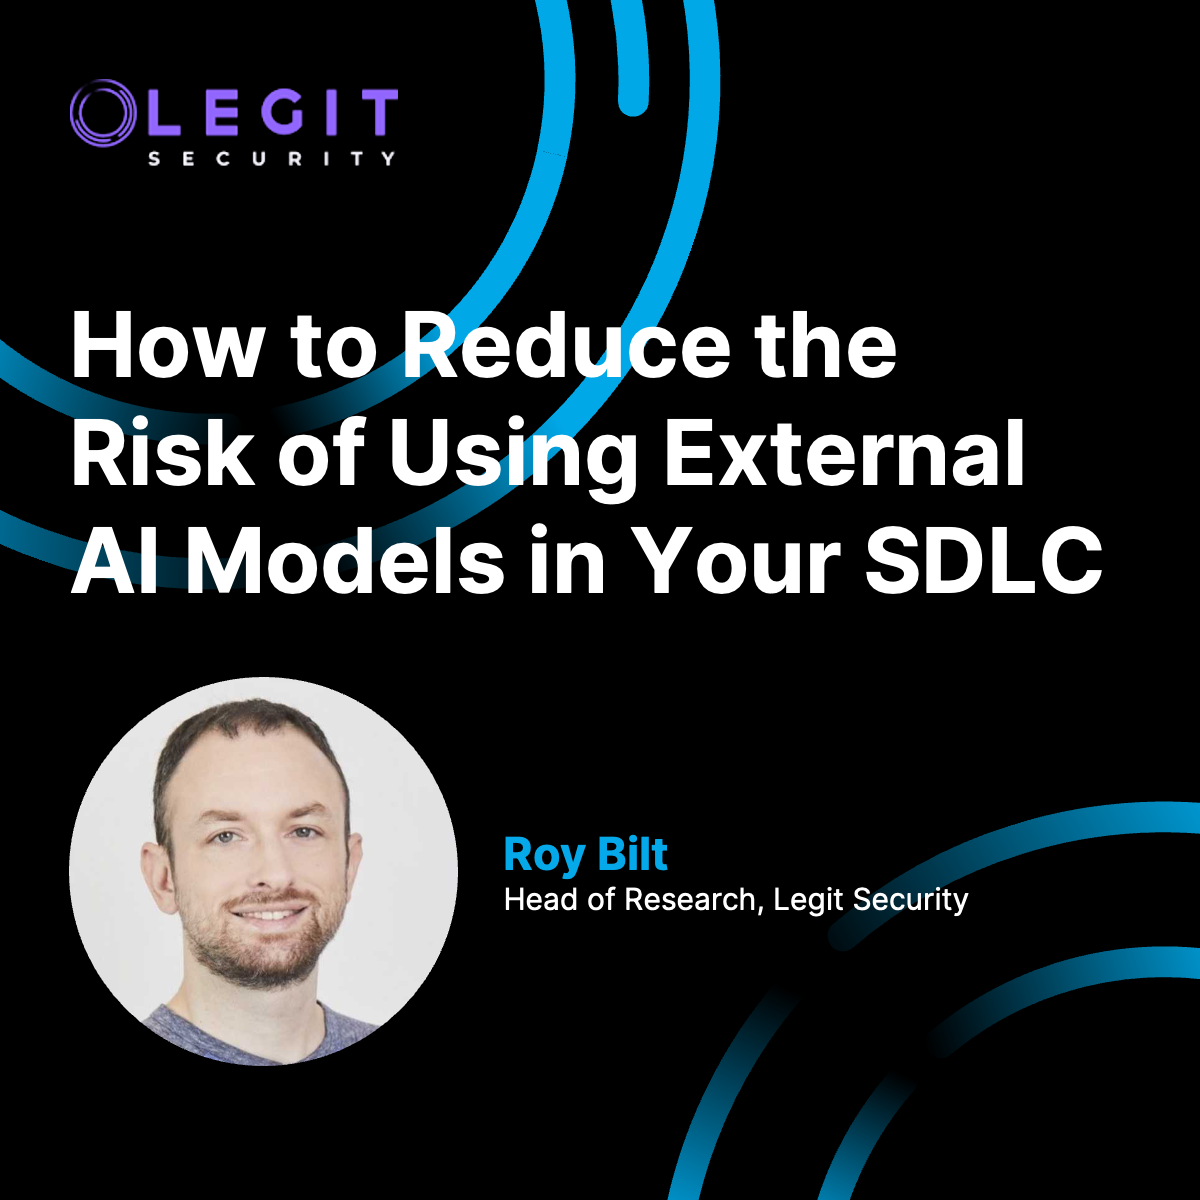 How to Reduce the Risk of Using External AI Models in Your SDLC